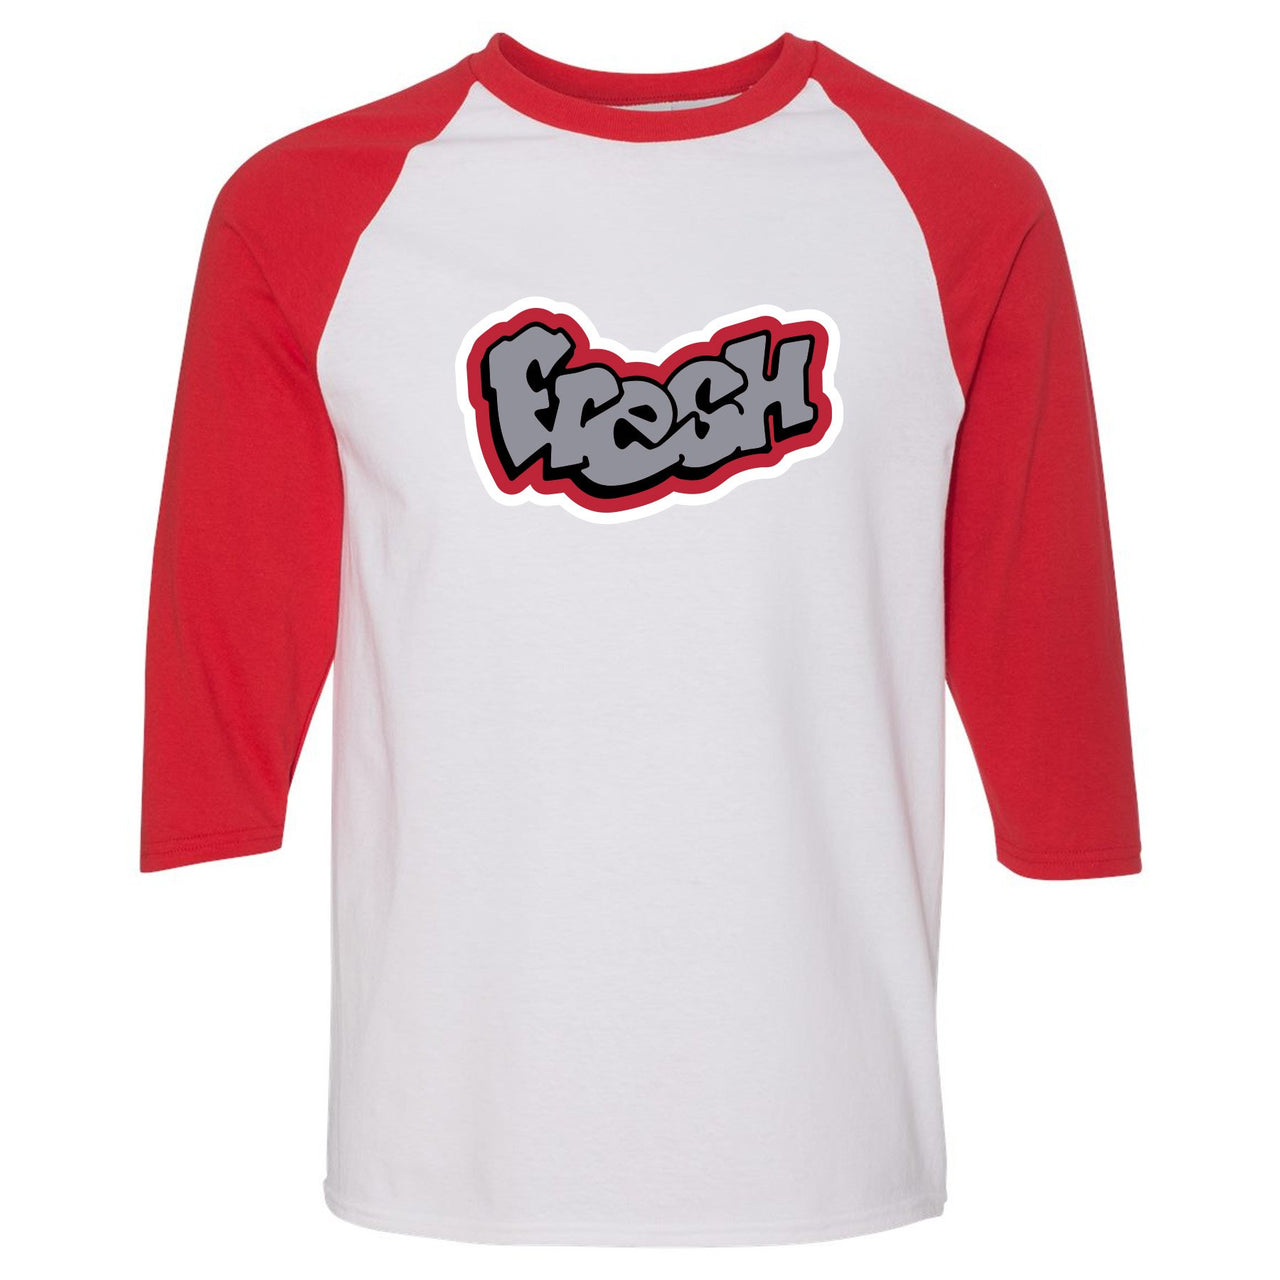 Reflections of a Champion 7s Raglan T Shirt | Fresh Logo, White and Red